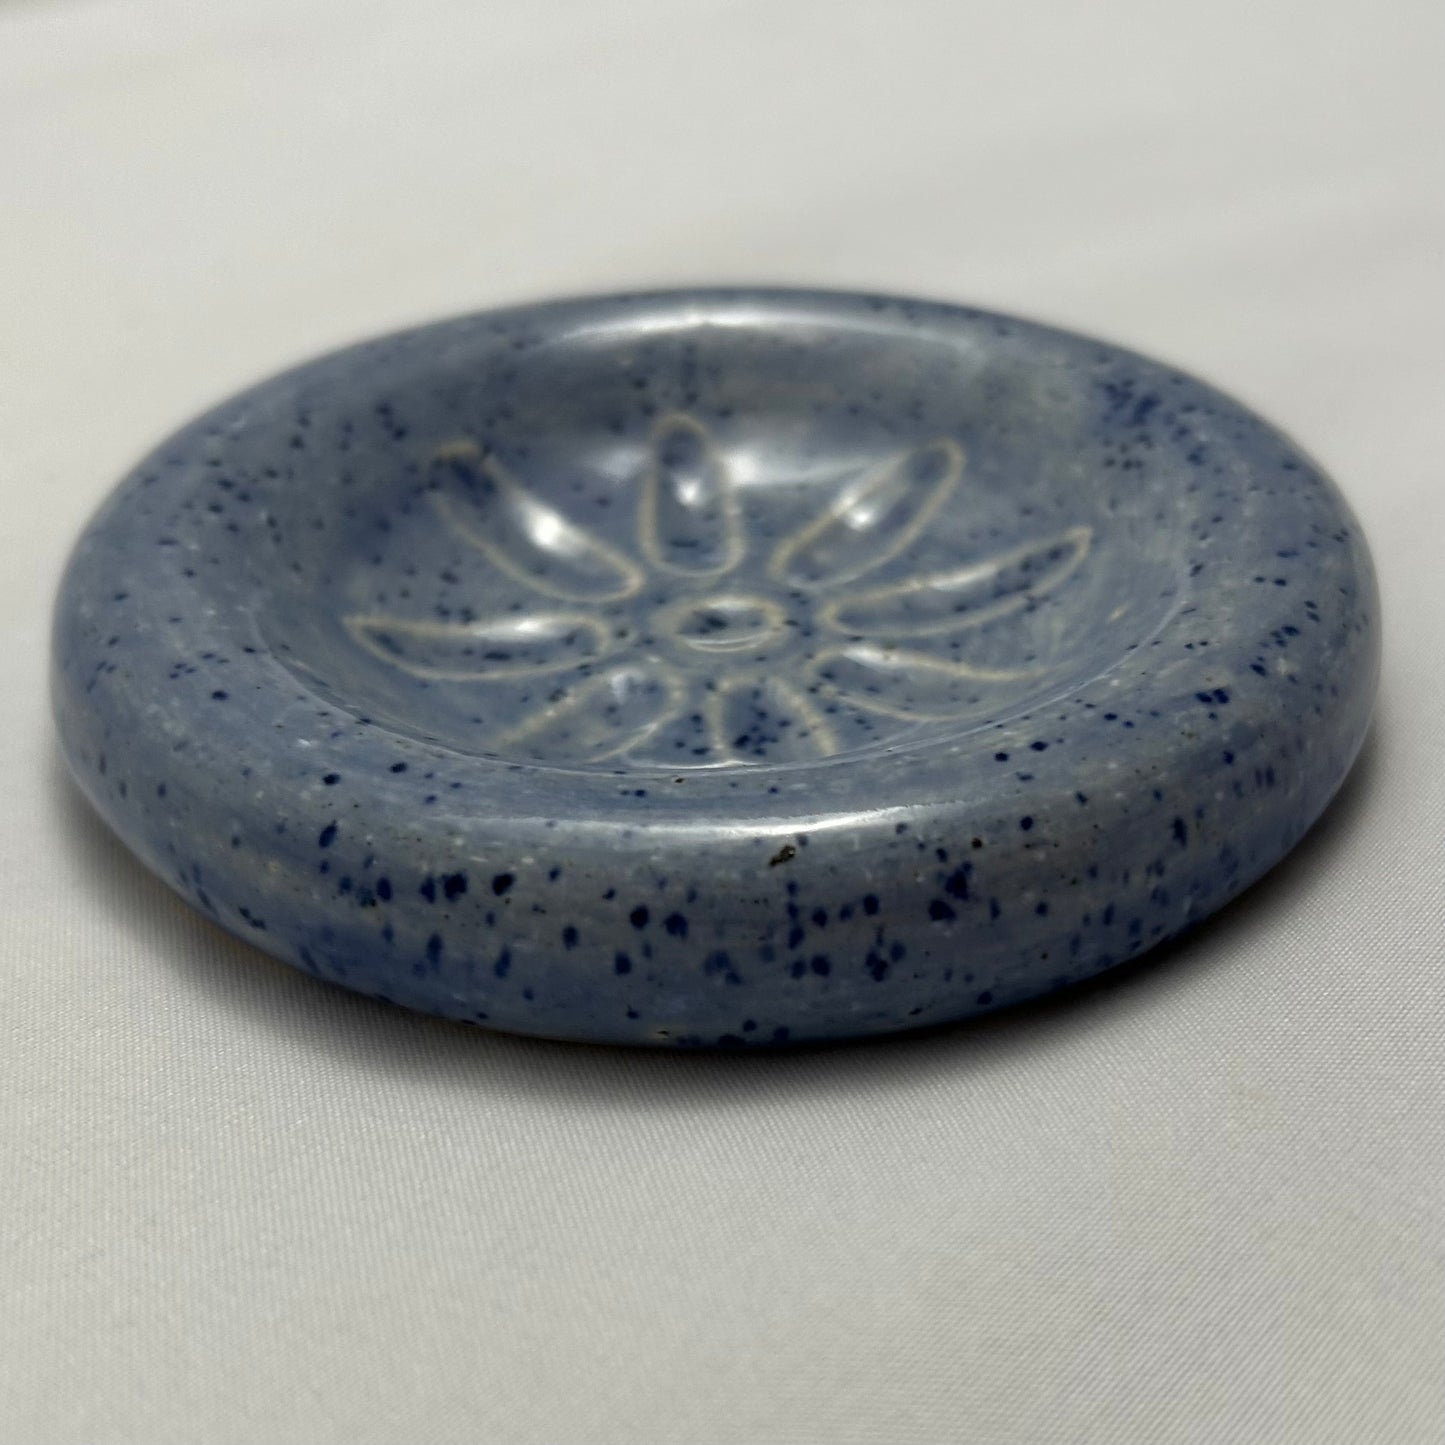 blue spotted flower dish / ash tray